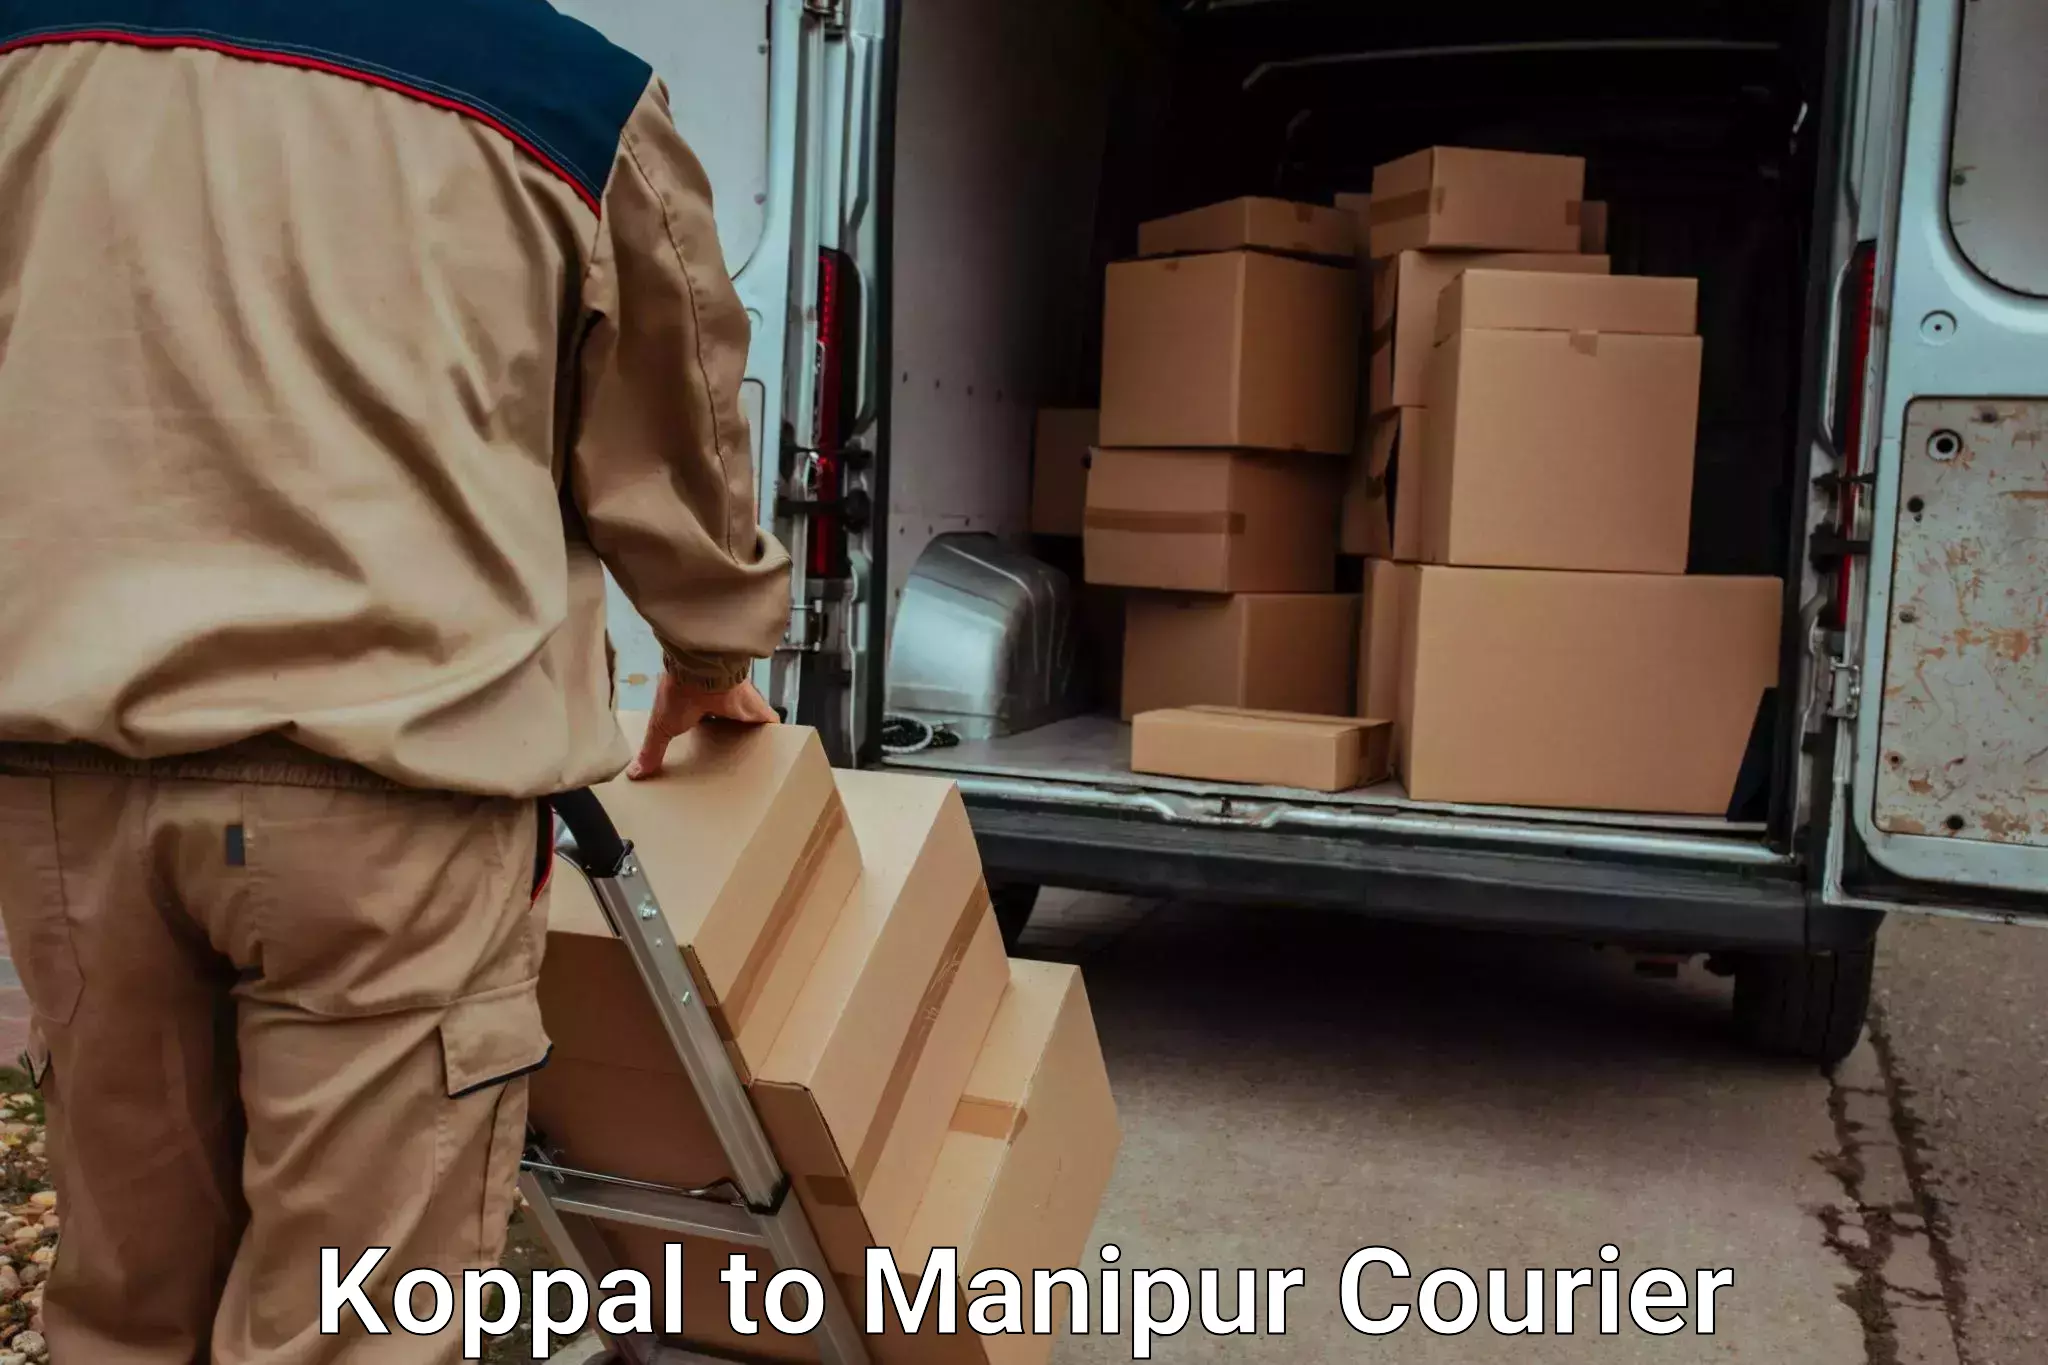 Trusted relocation experts Koppal to Manipur